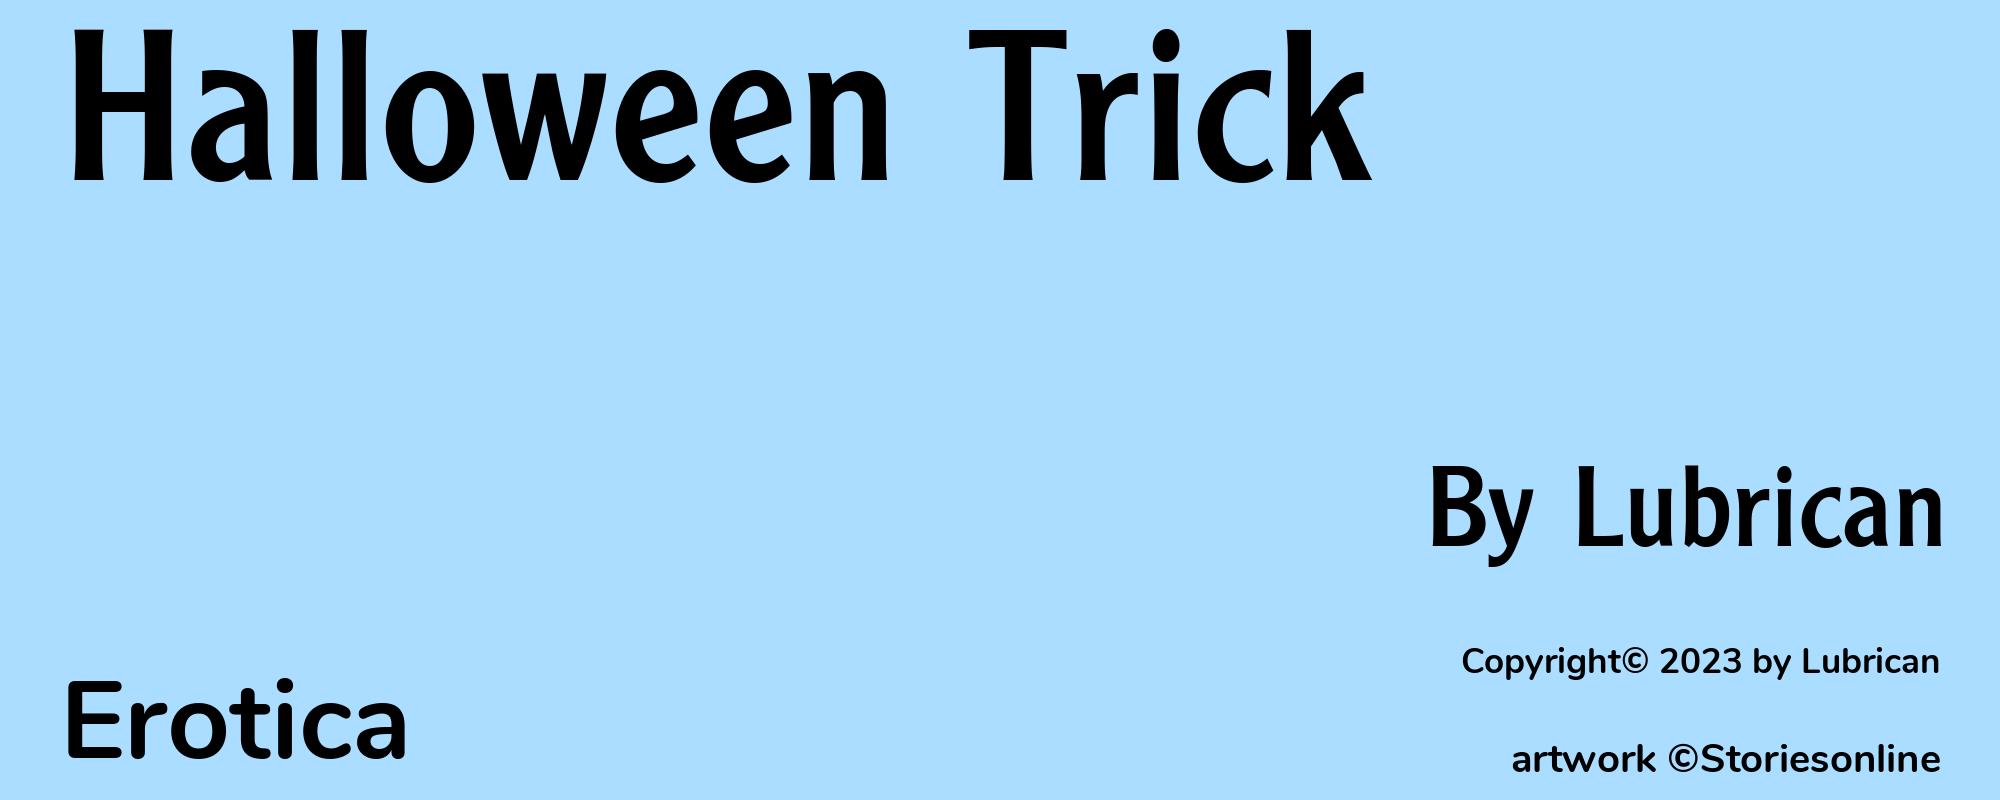 Halloween Trick - Cover